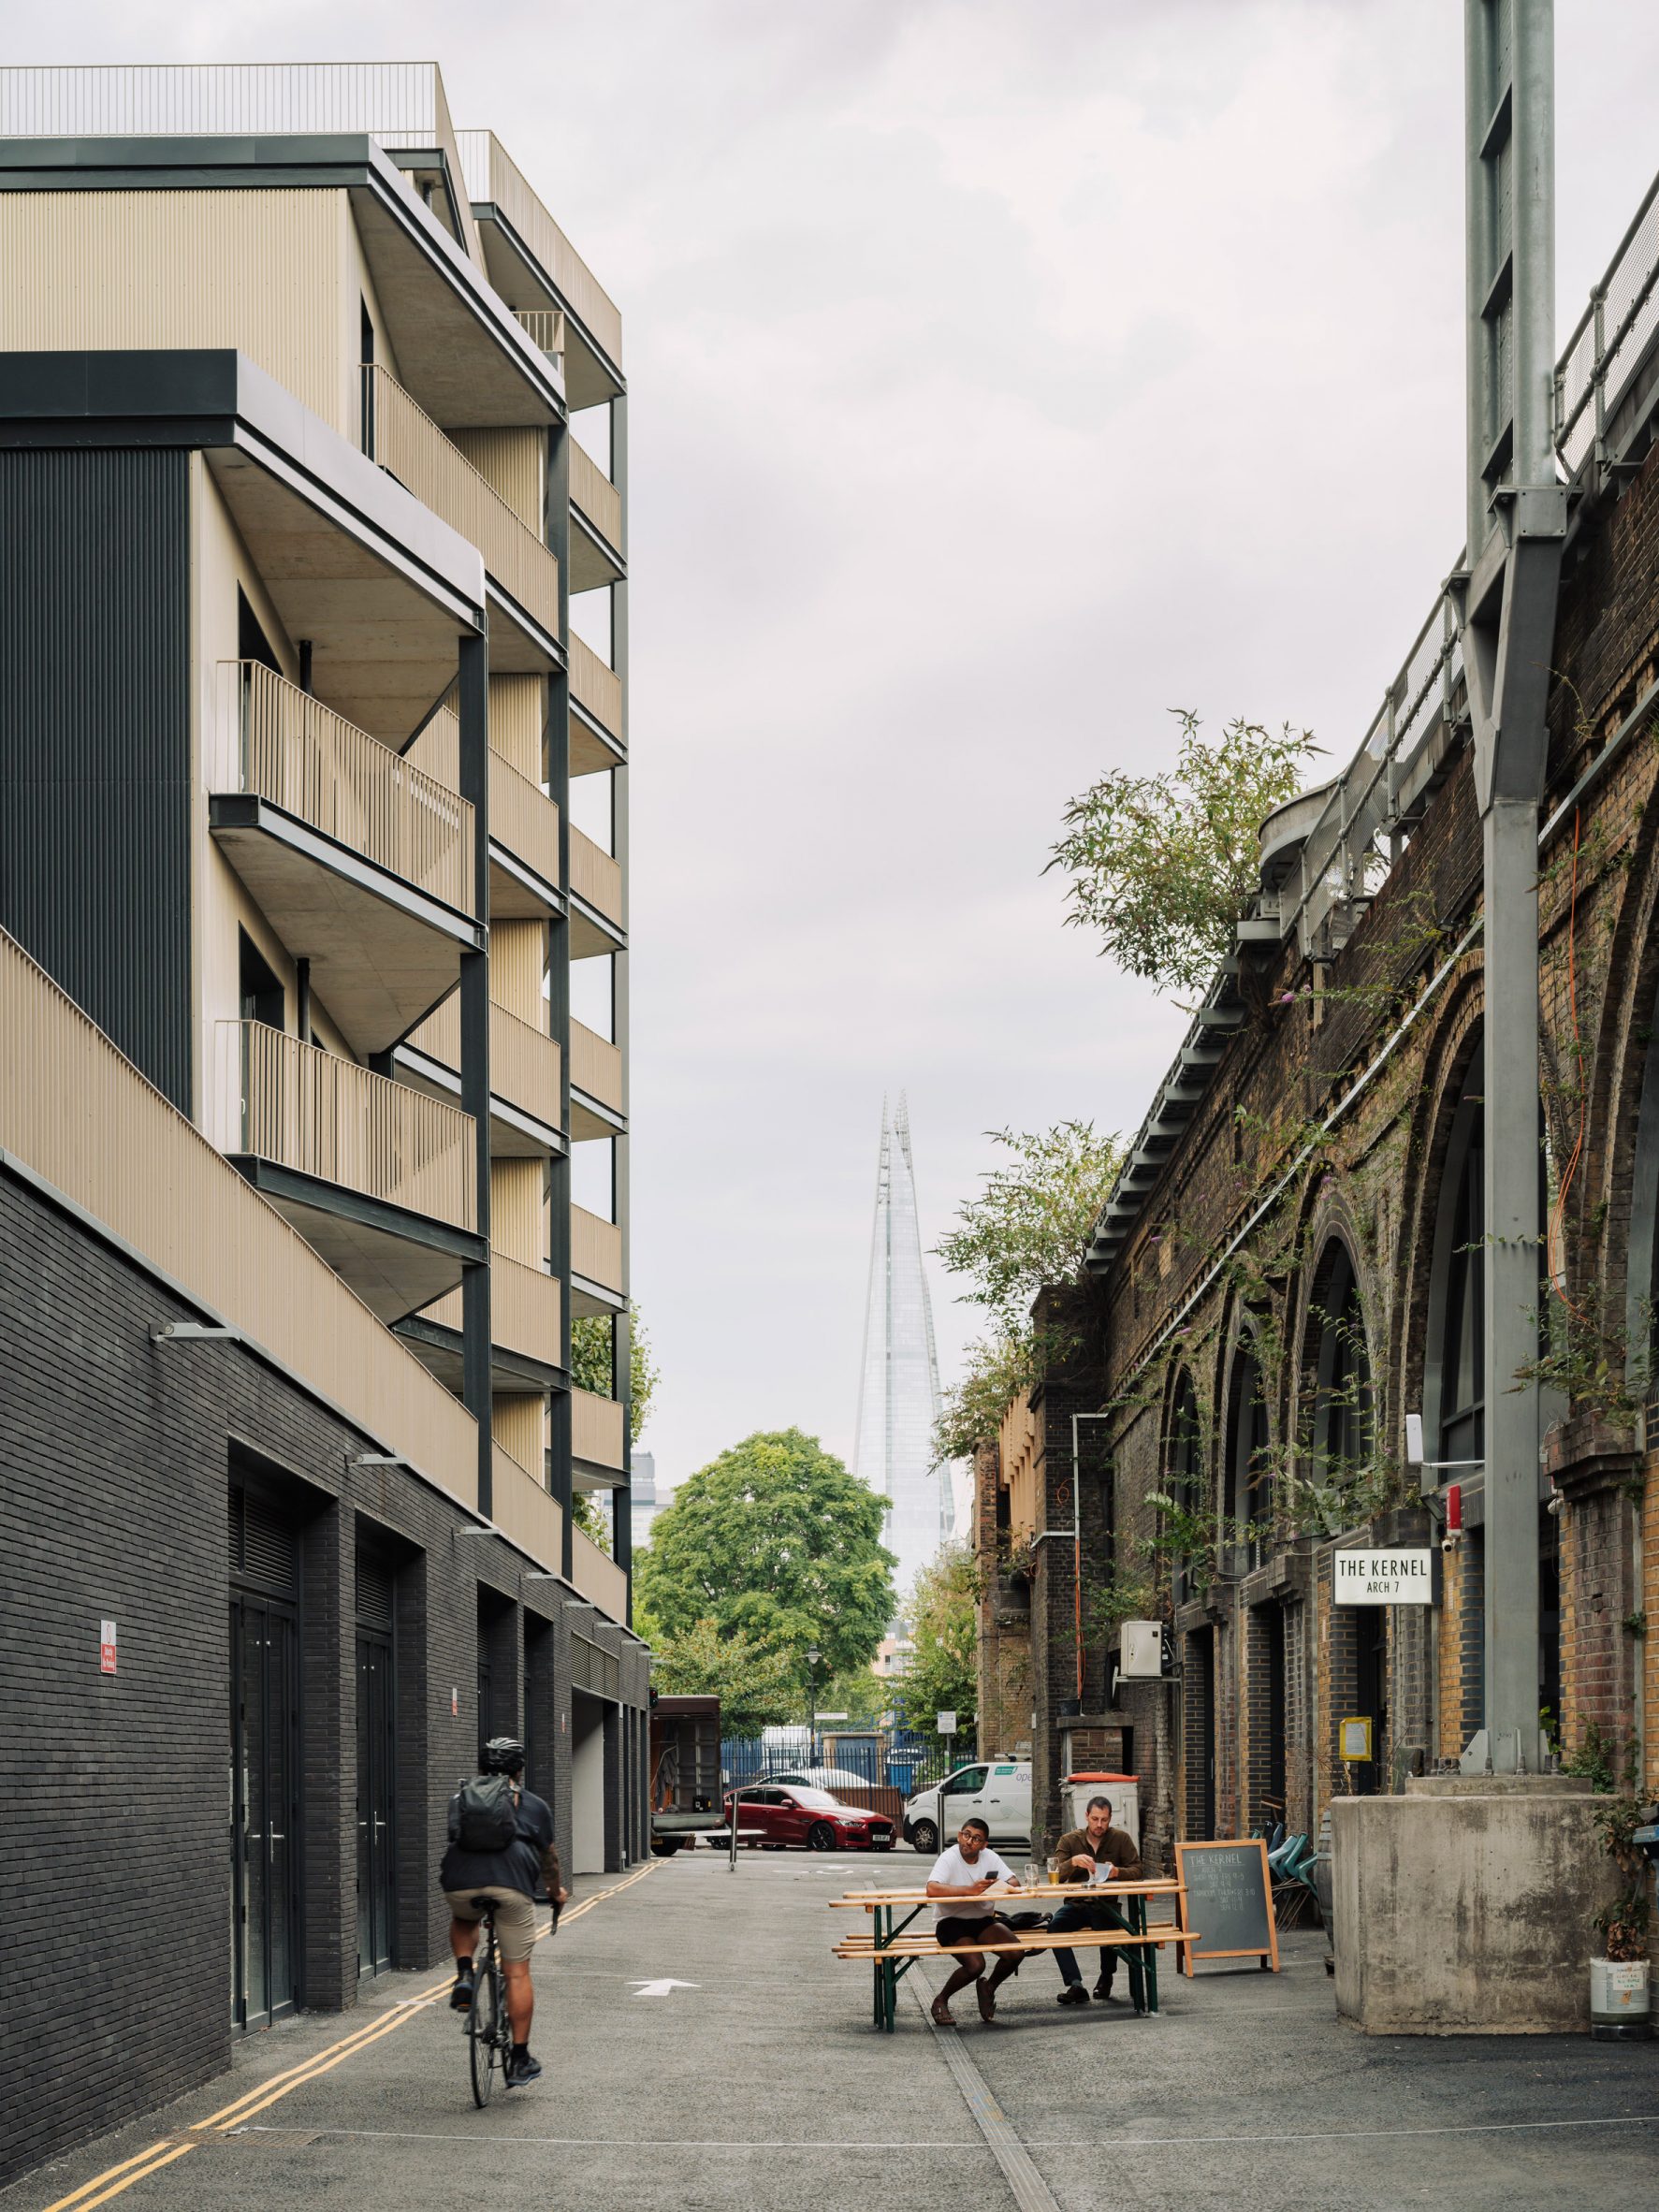 Dockley Apartments by Studio Woodroffe Papa and Poggi Architecture beside railway arches